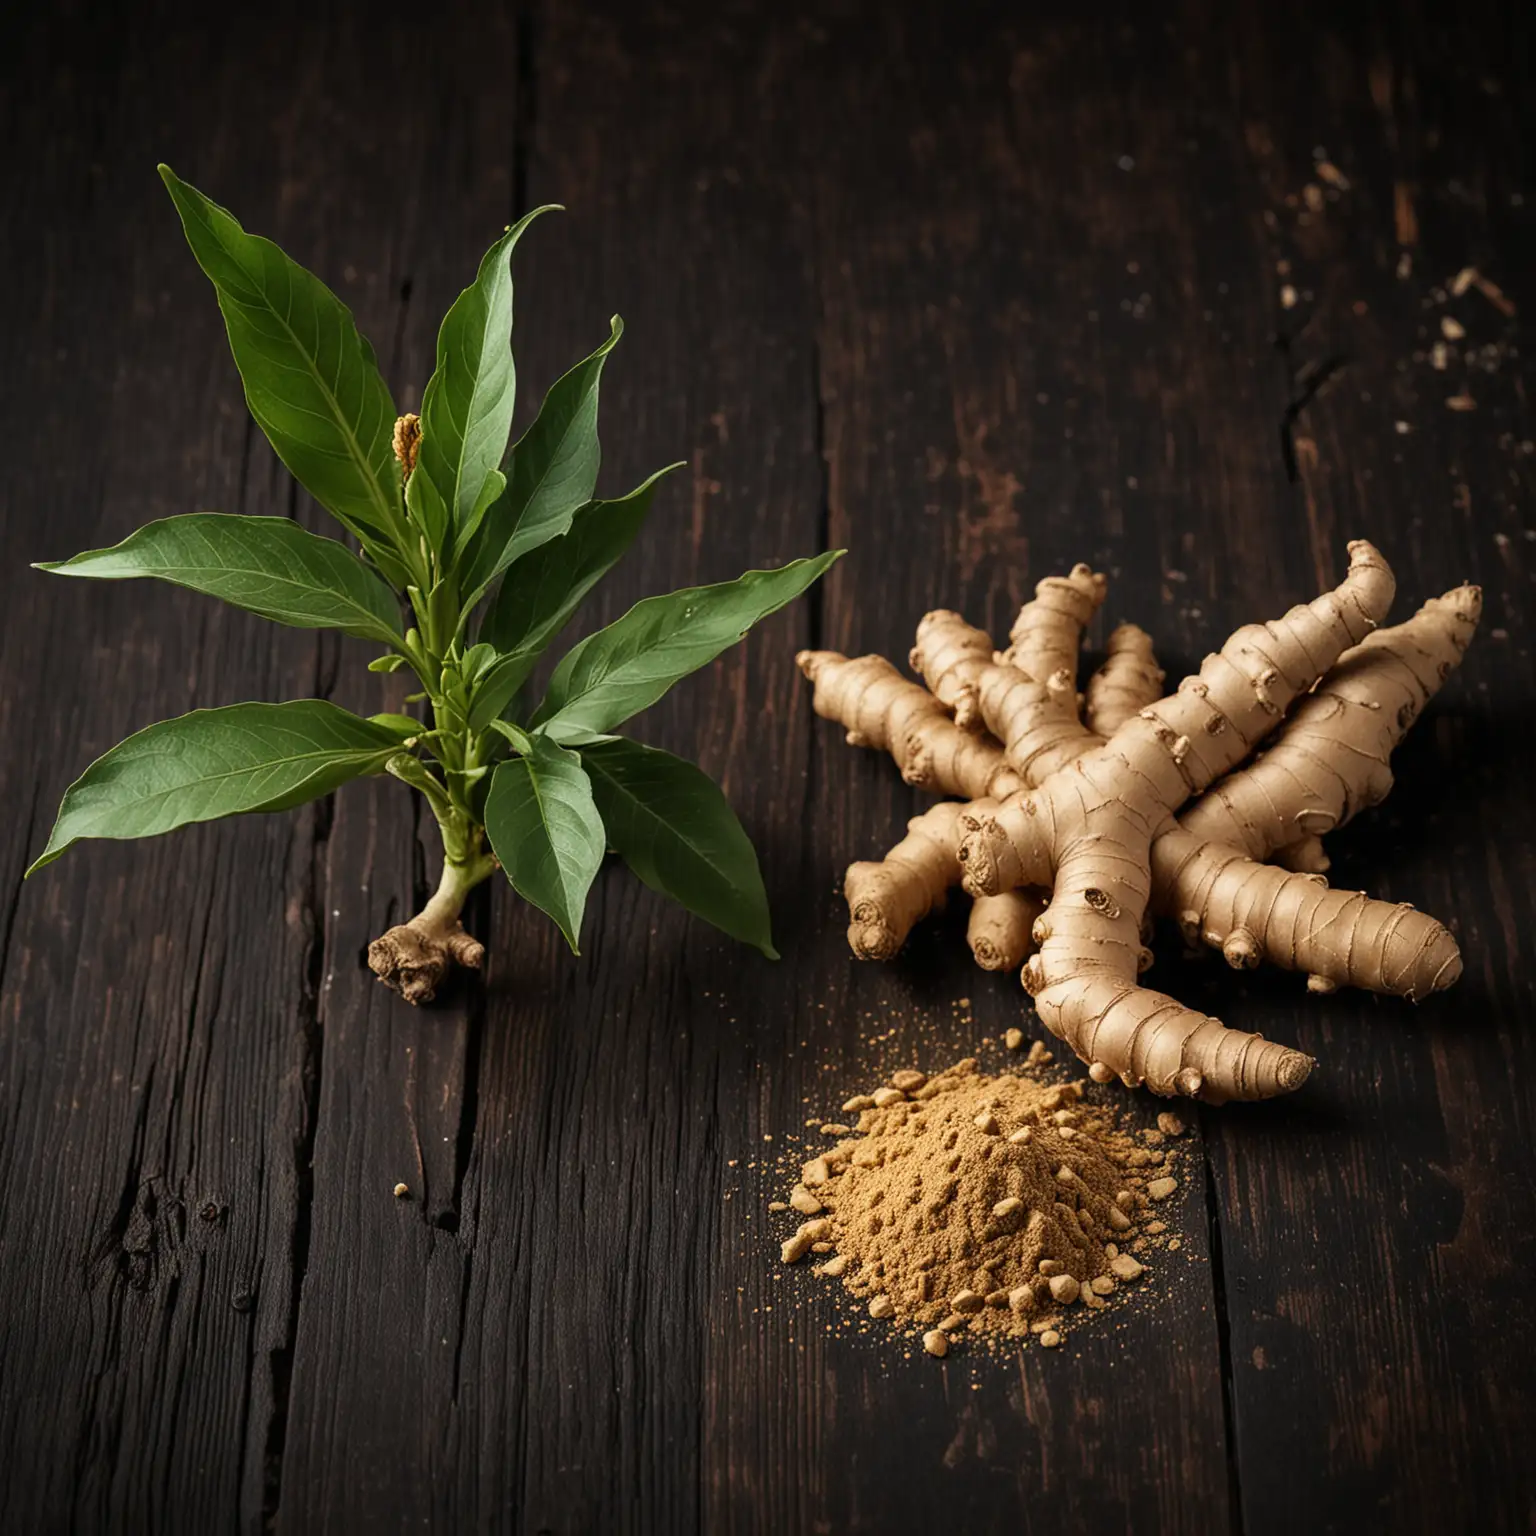 Ginger Plant in Stem Root and Powder Form on Dark Wooden Table